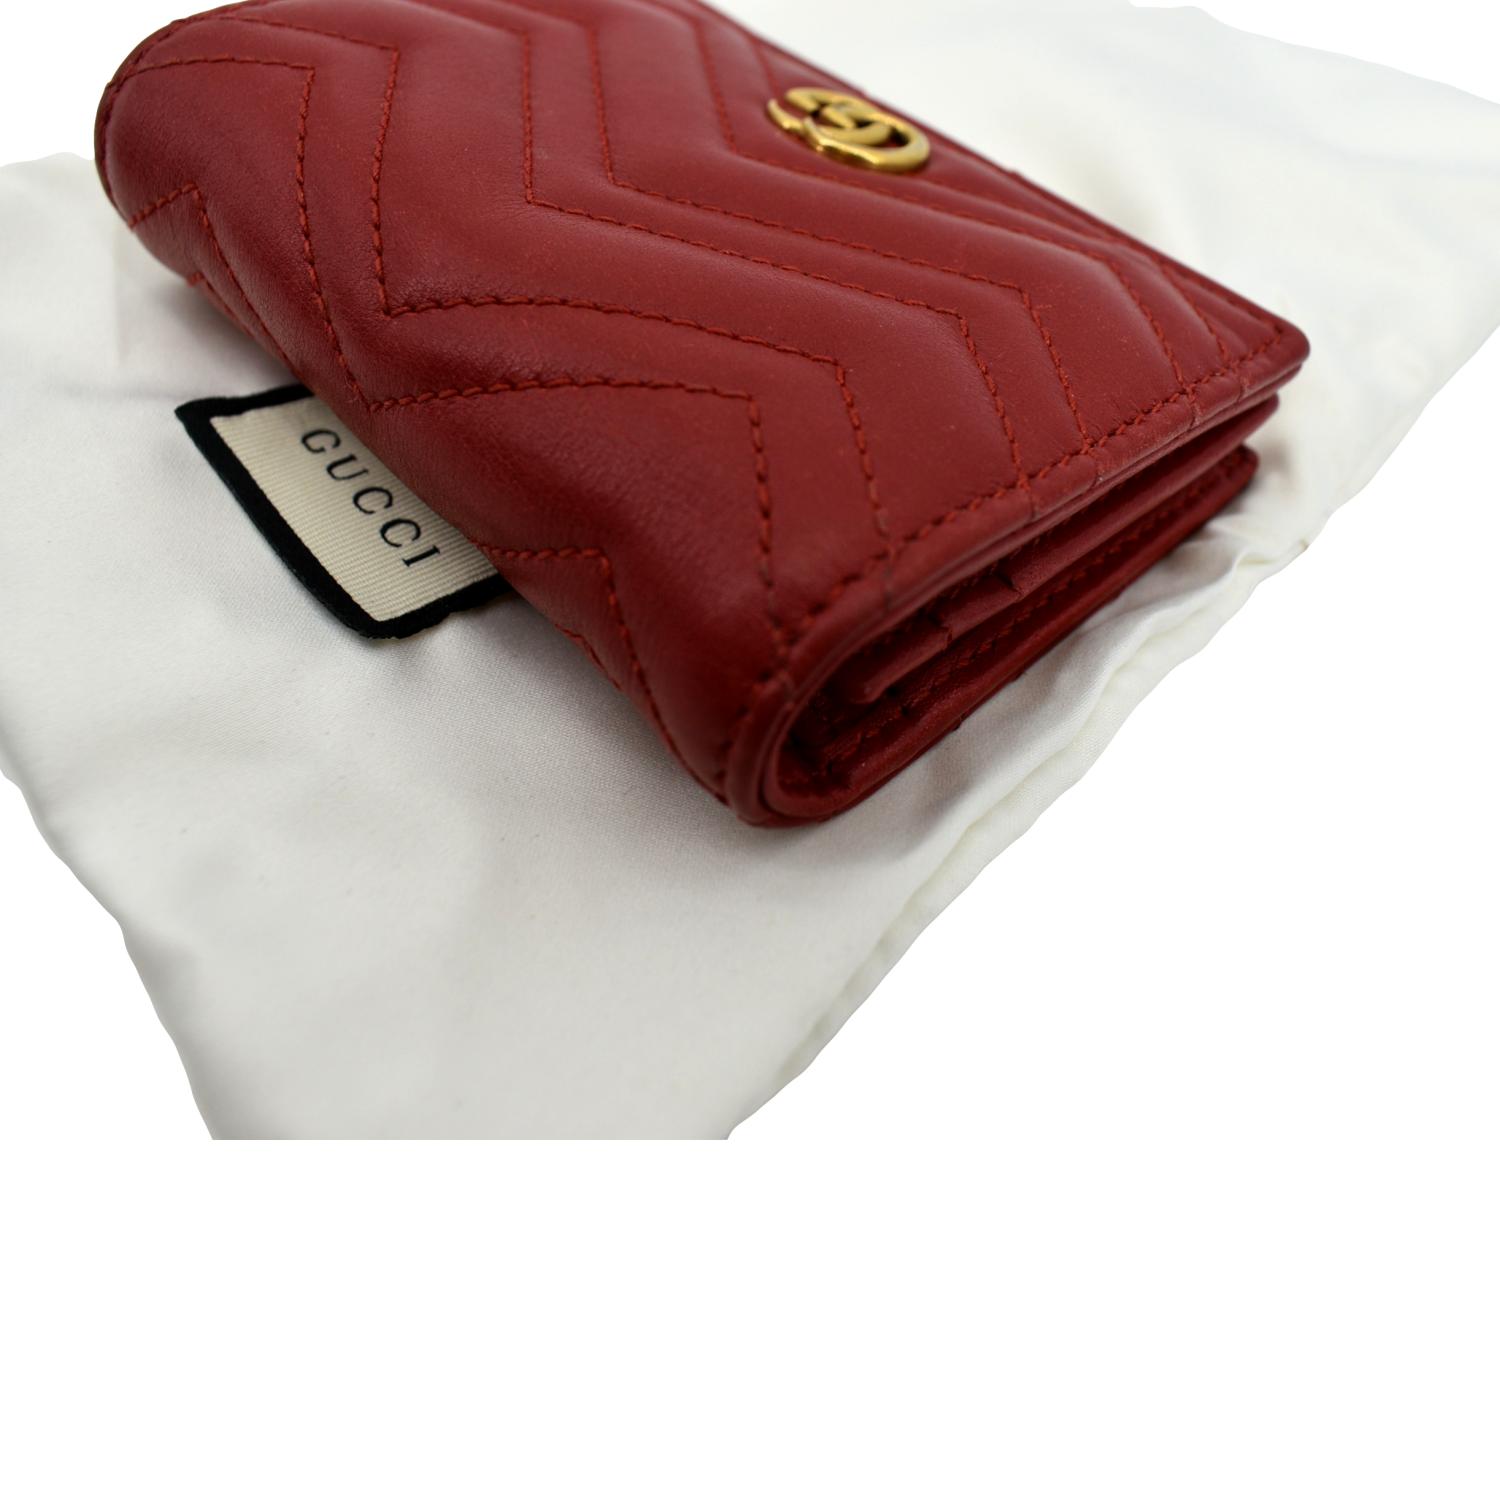 Gucci Leather Card Case Wallet